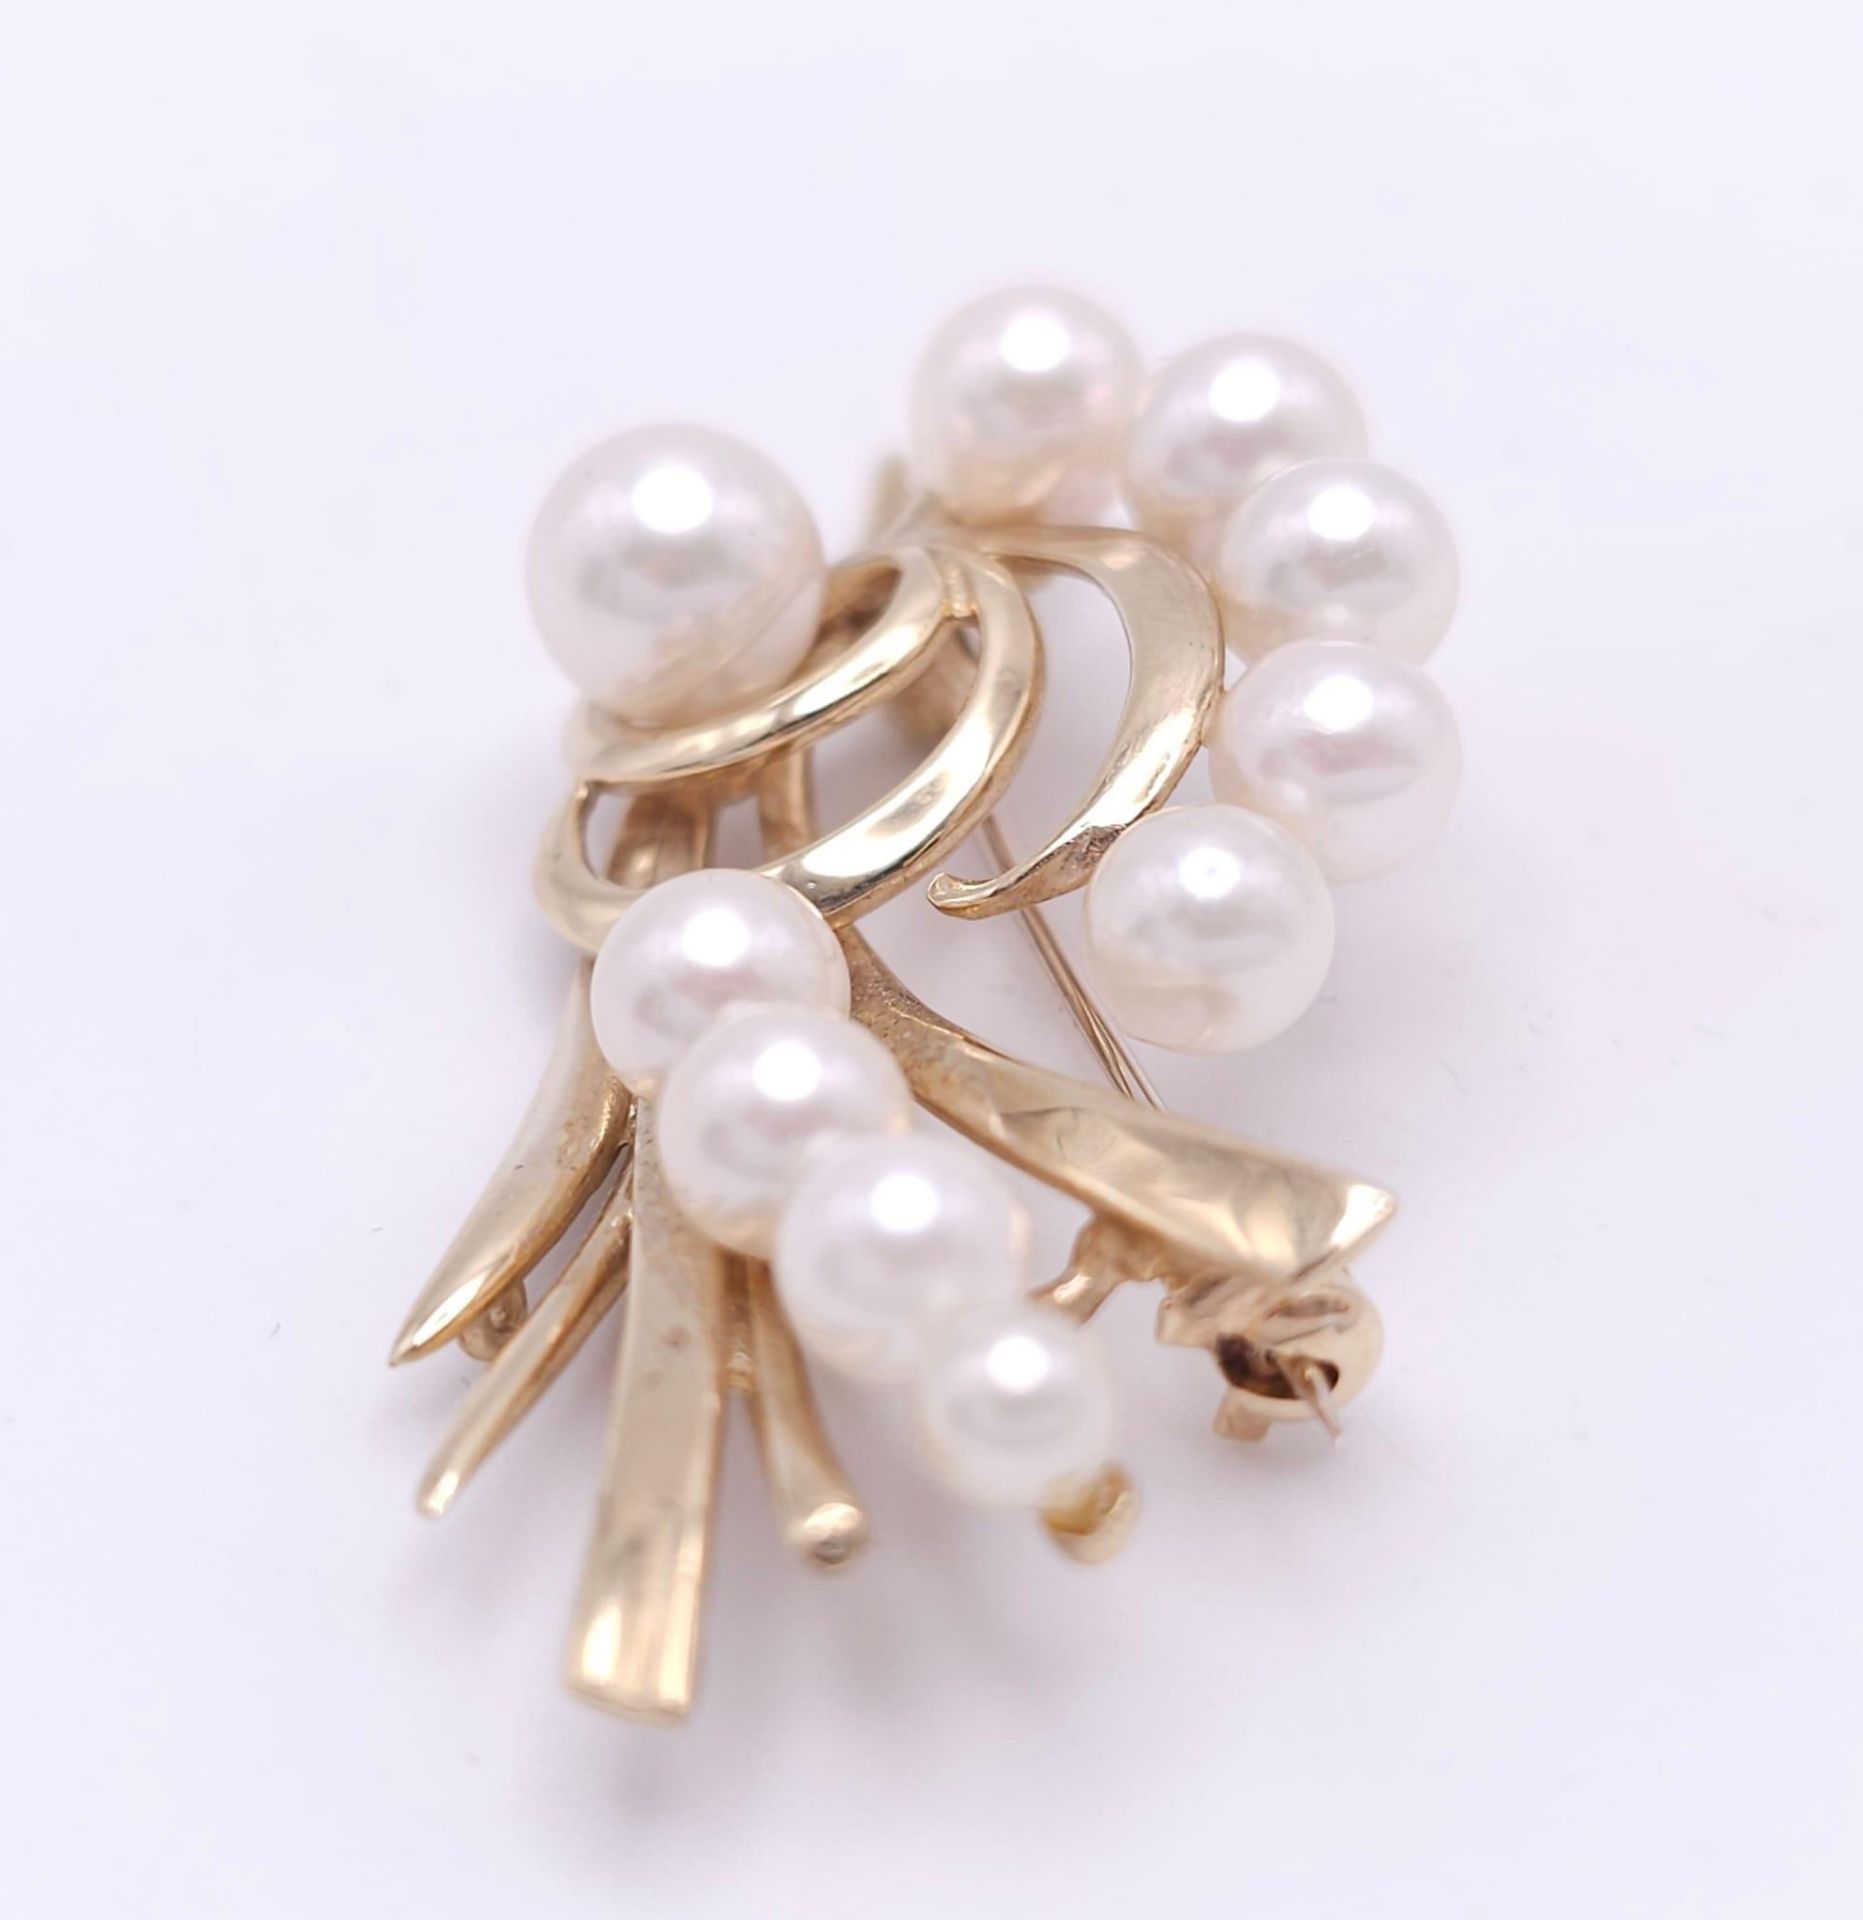 A 9k Yellow Gold and Pearl Decorative Floral Brooch. 5cm. 8g weight - Image 12 of 23